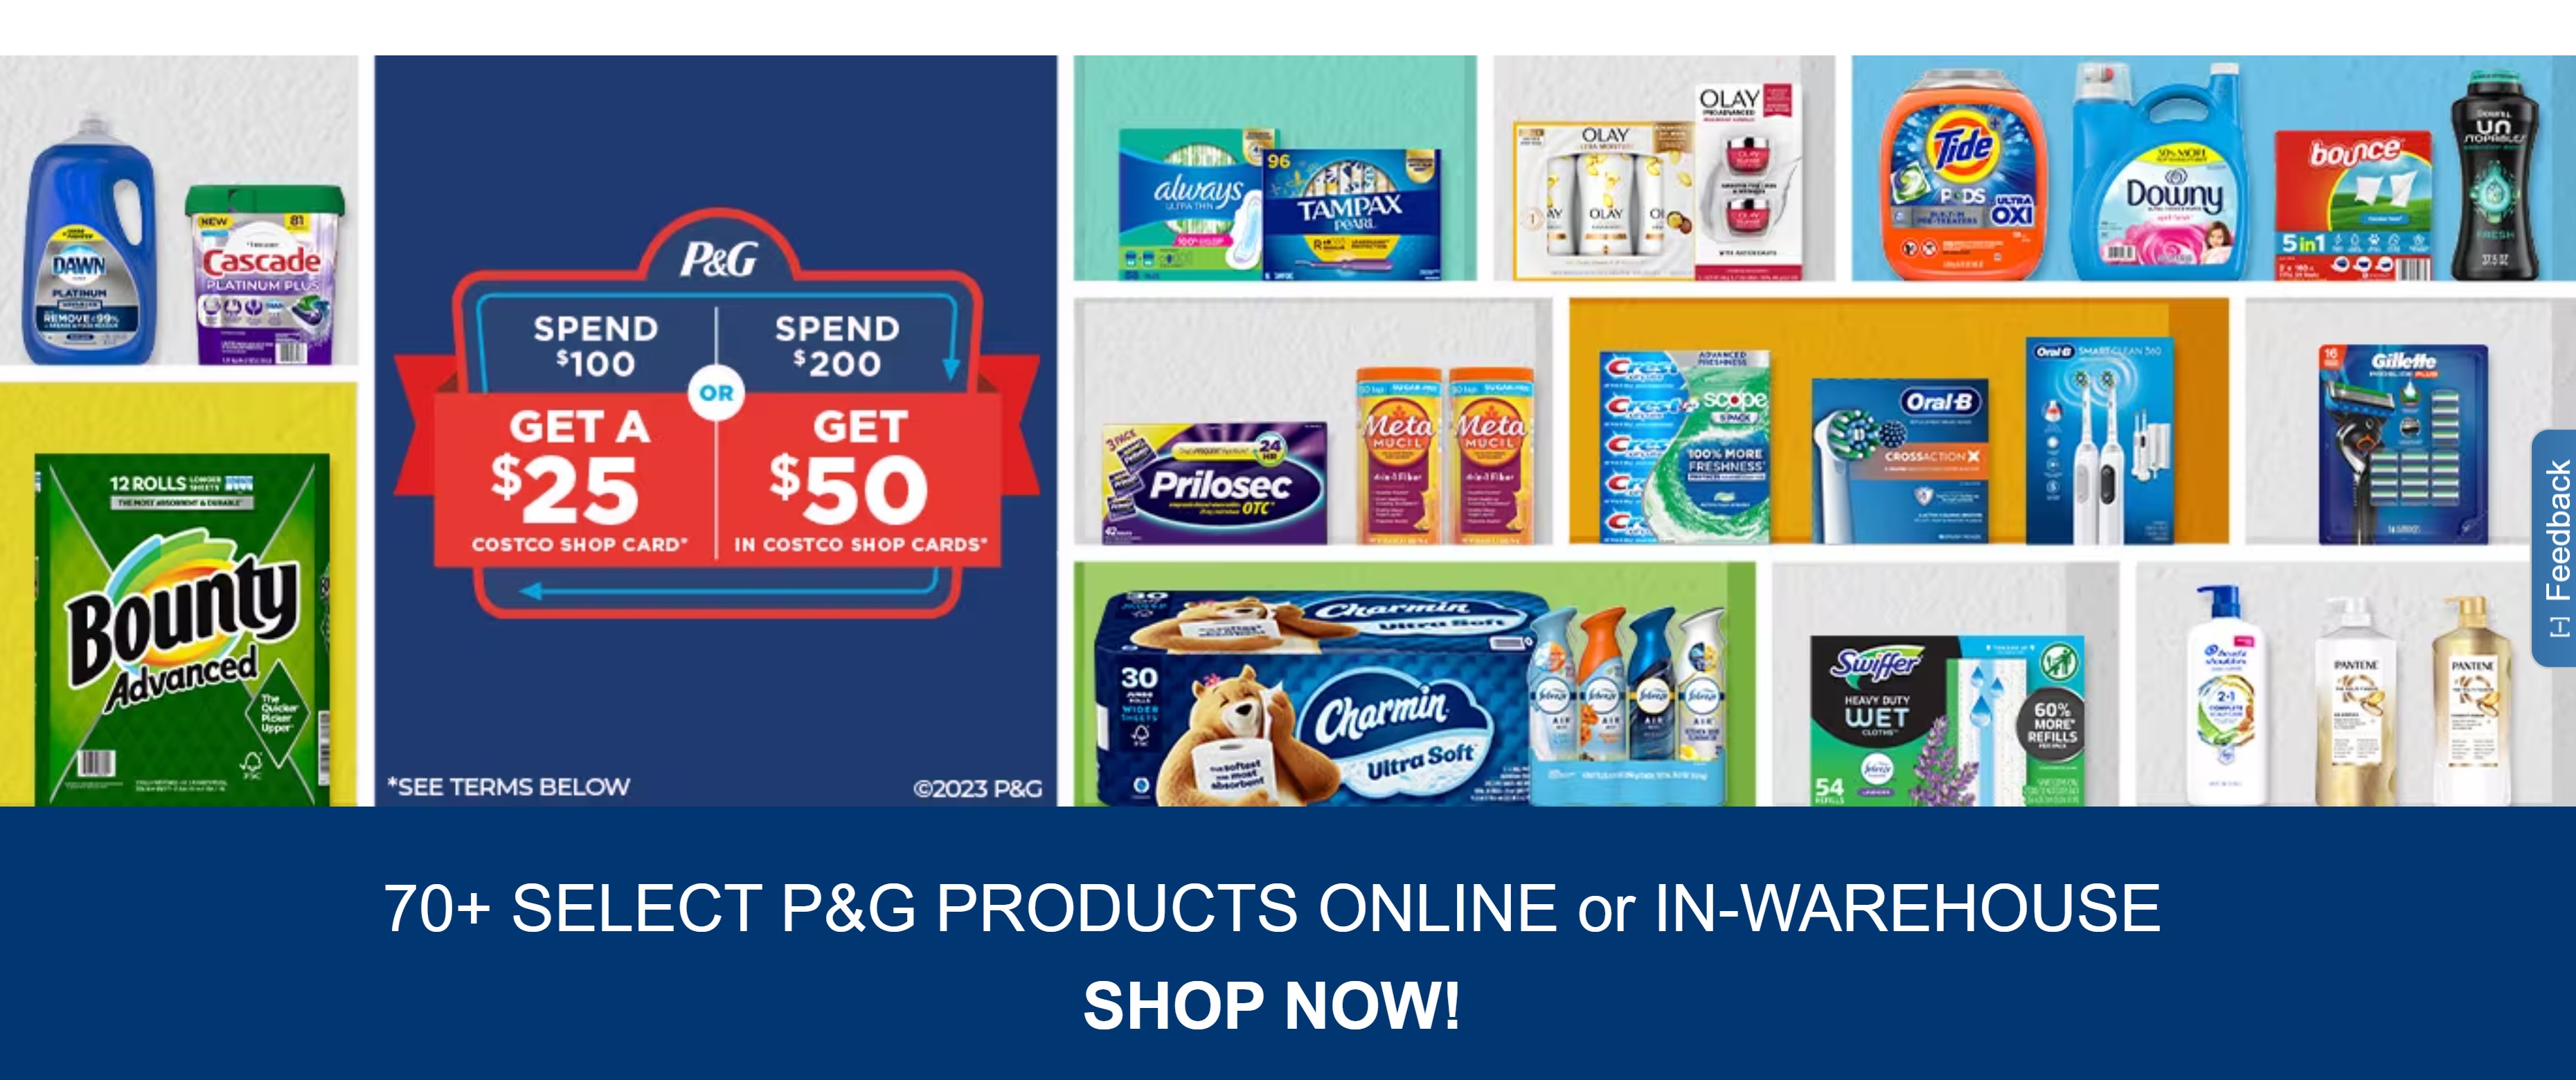 Costco P&G ITEMS 25 usd rebate after 100 or 50 usd rebate after 200 $75